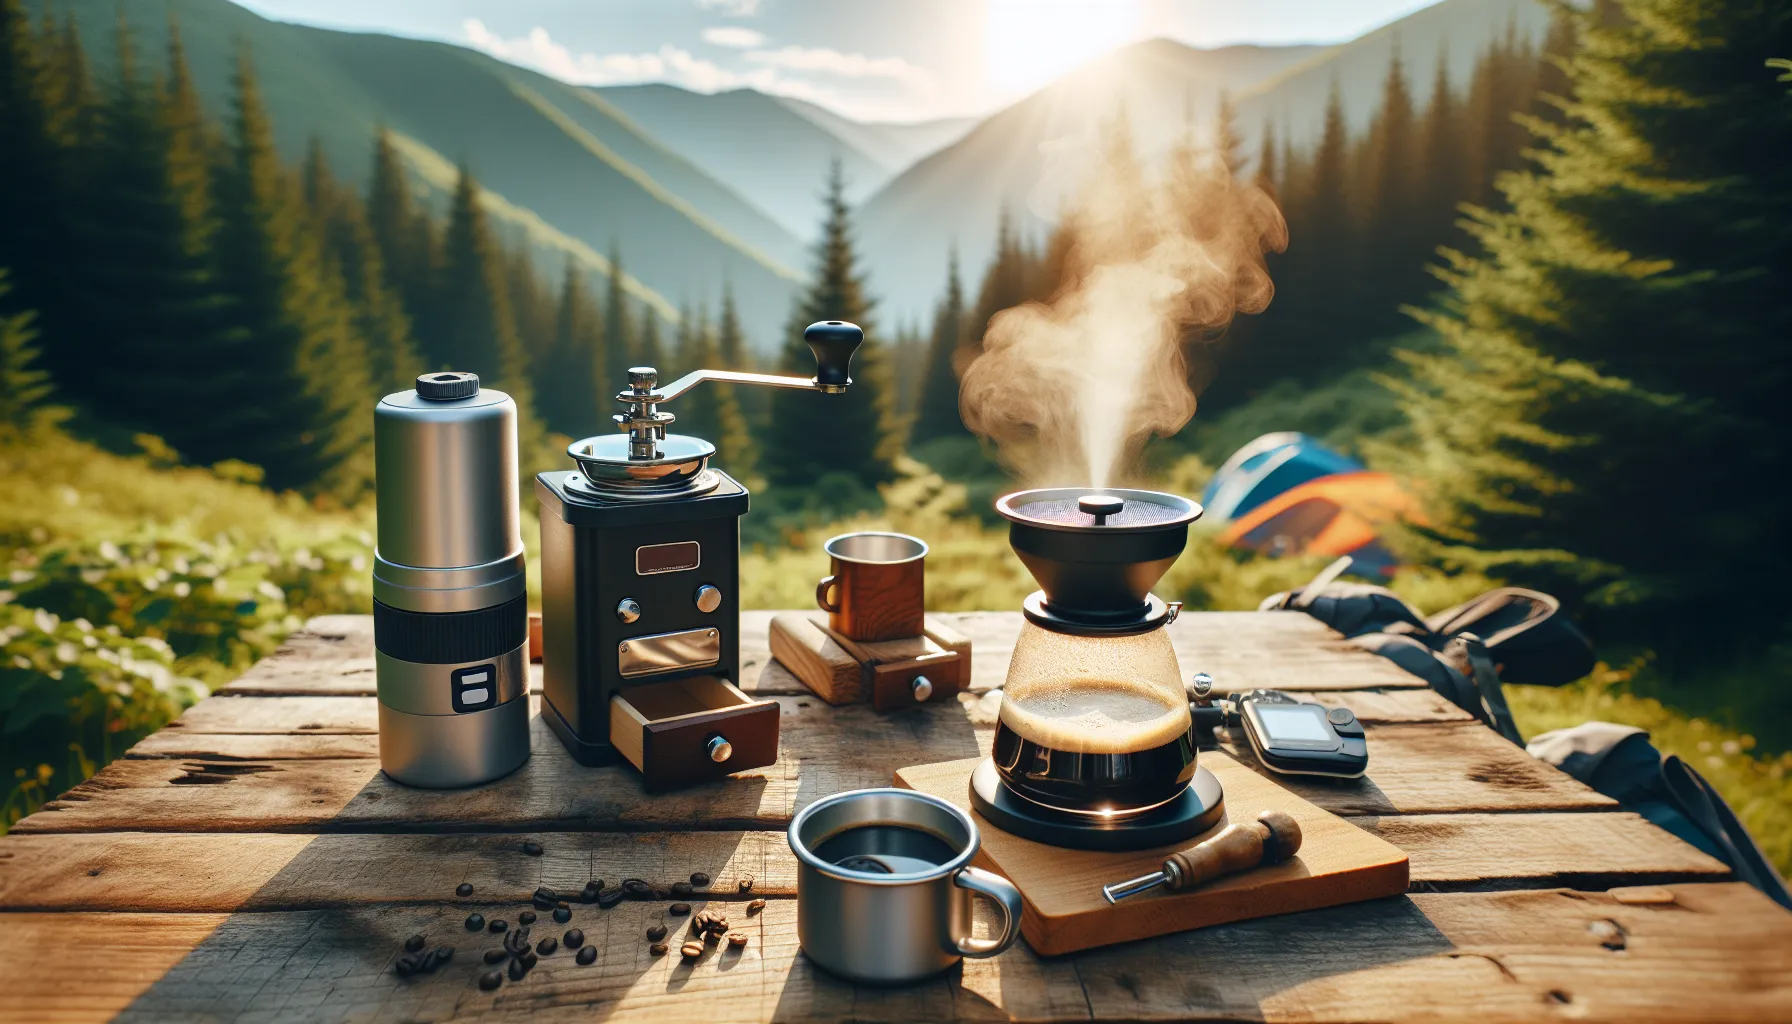 Coffee on the Go: 4 Essential Travel Coffee Accessories